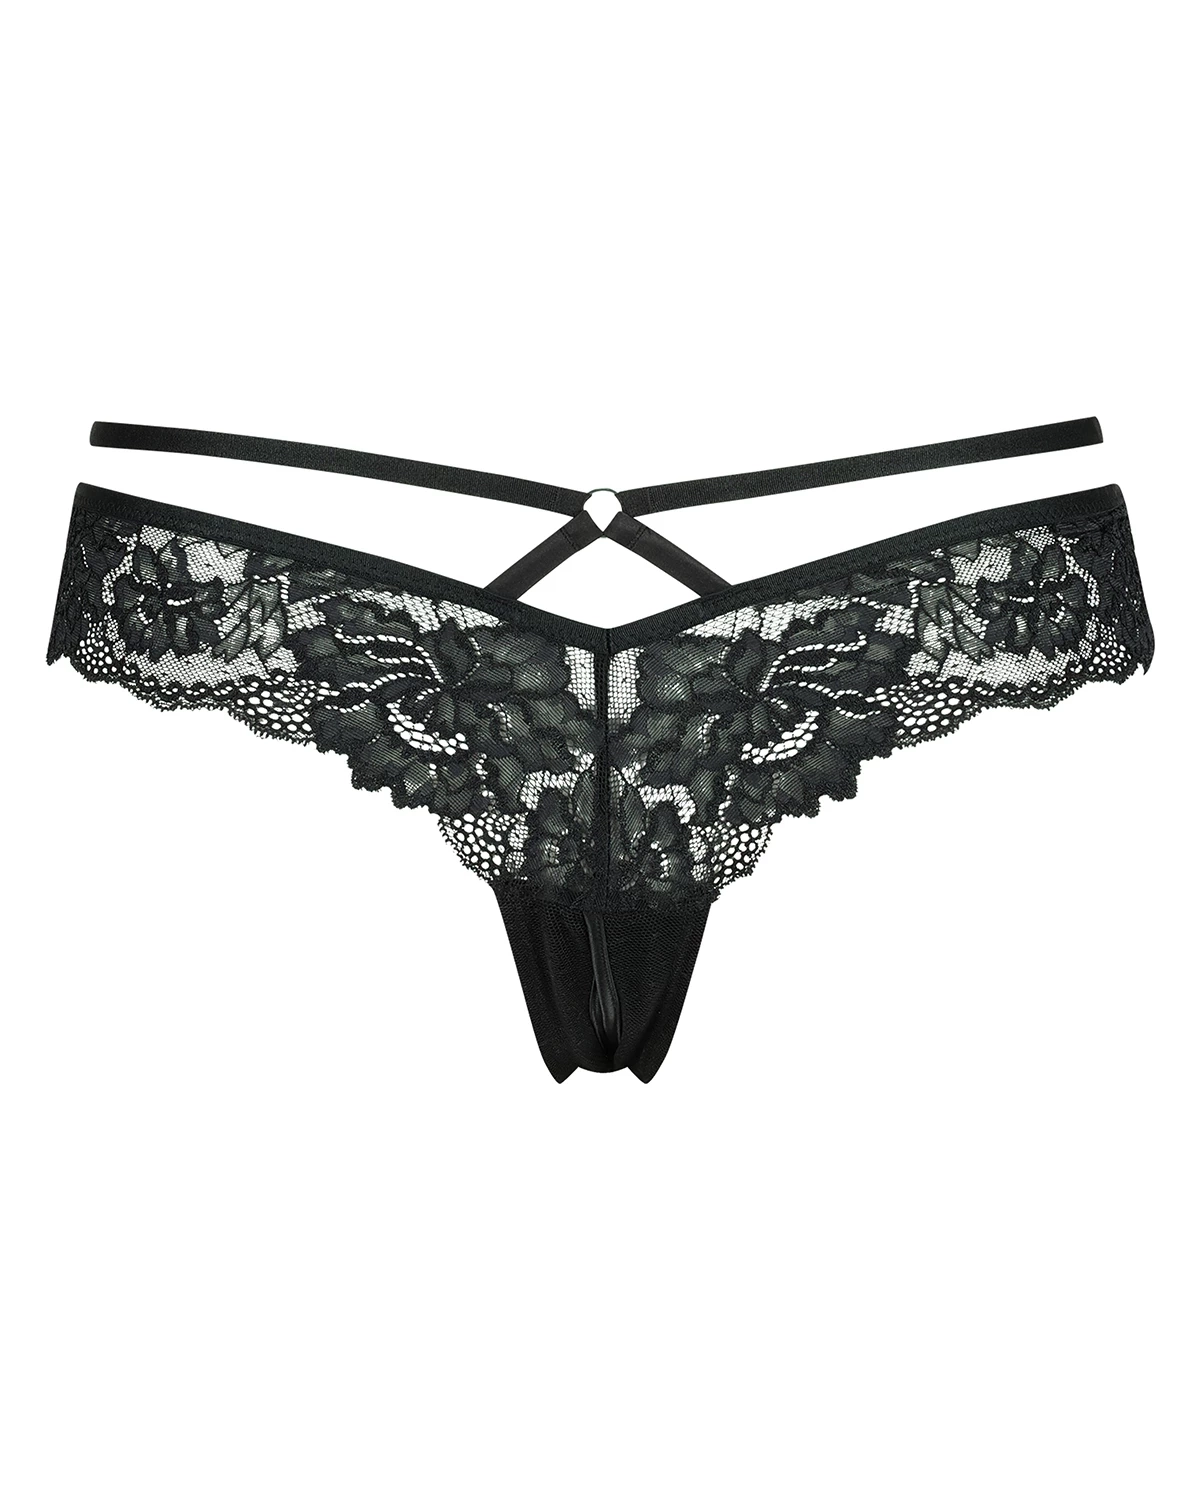 Sosha Brazilian with open crotch for €16.99 - New Arrivals